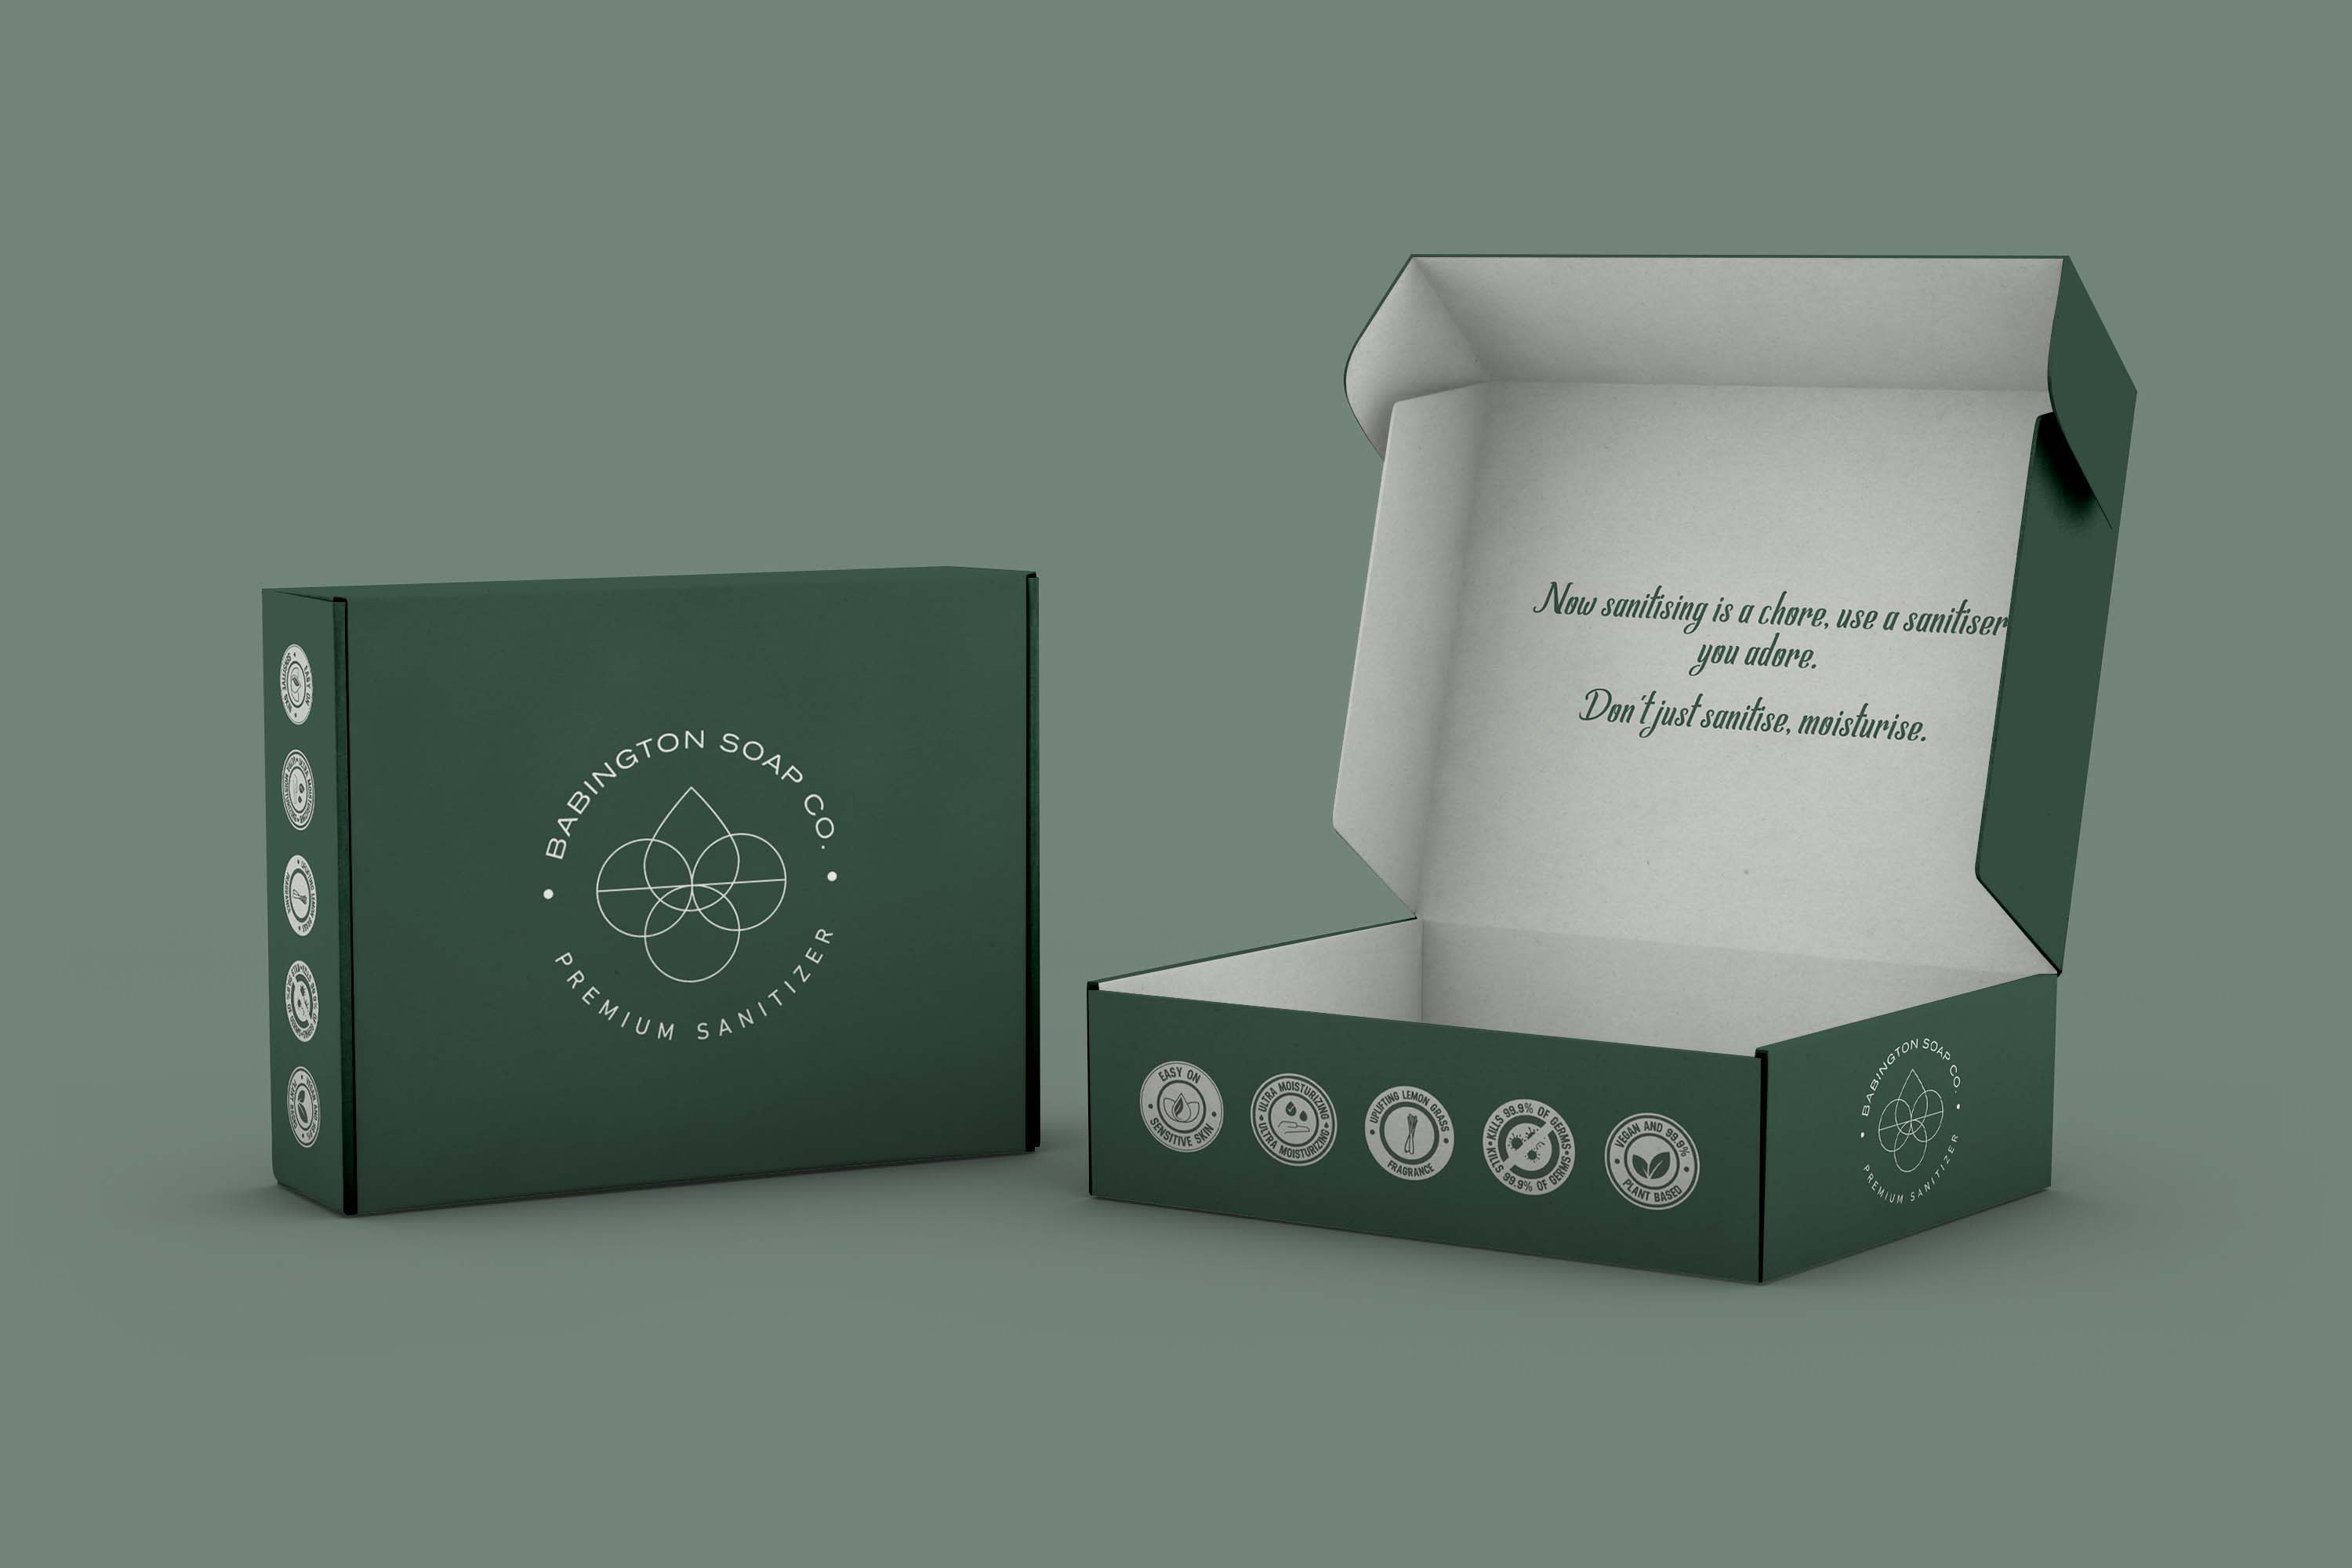 Mailer And Subscription Box Packaging Design In Your Product By Designerazom01 Fiverr